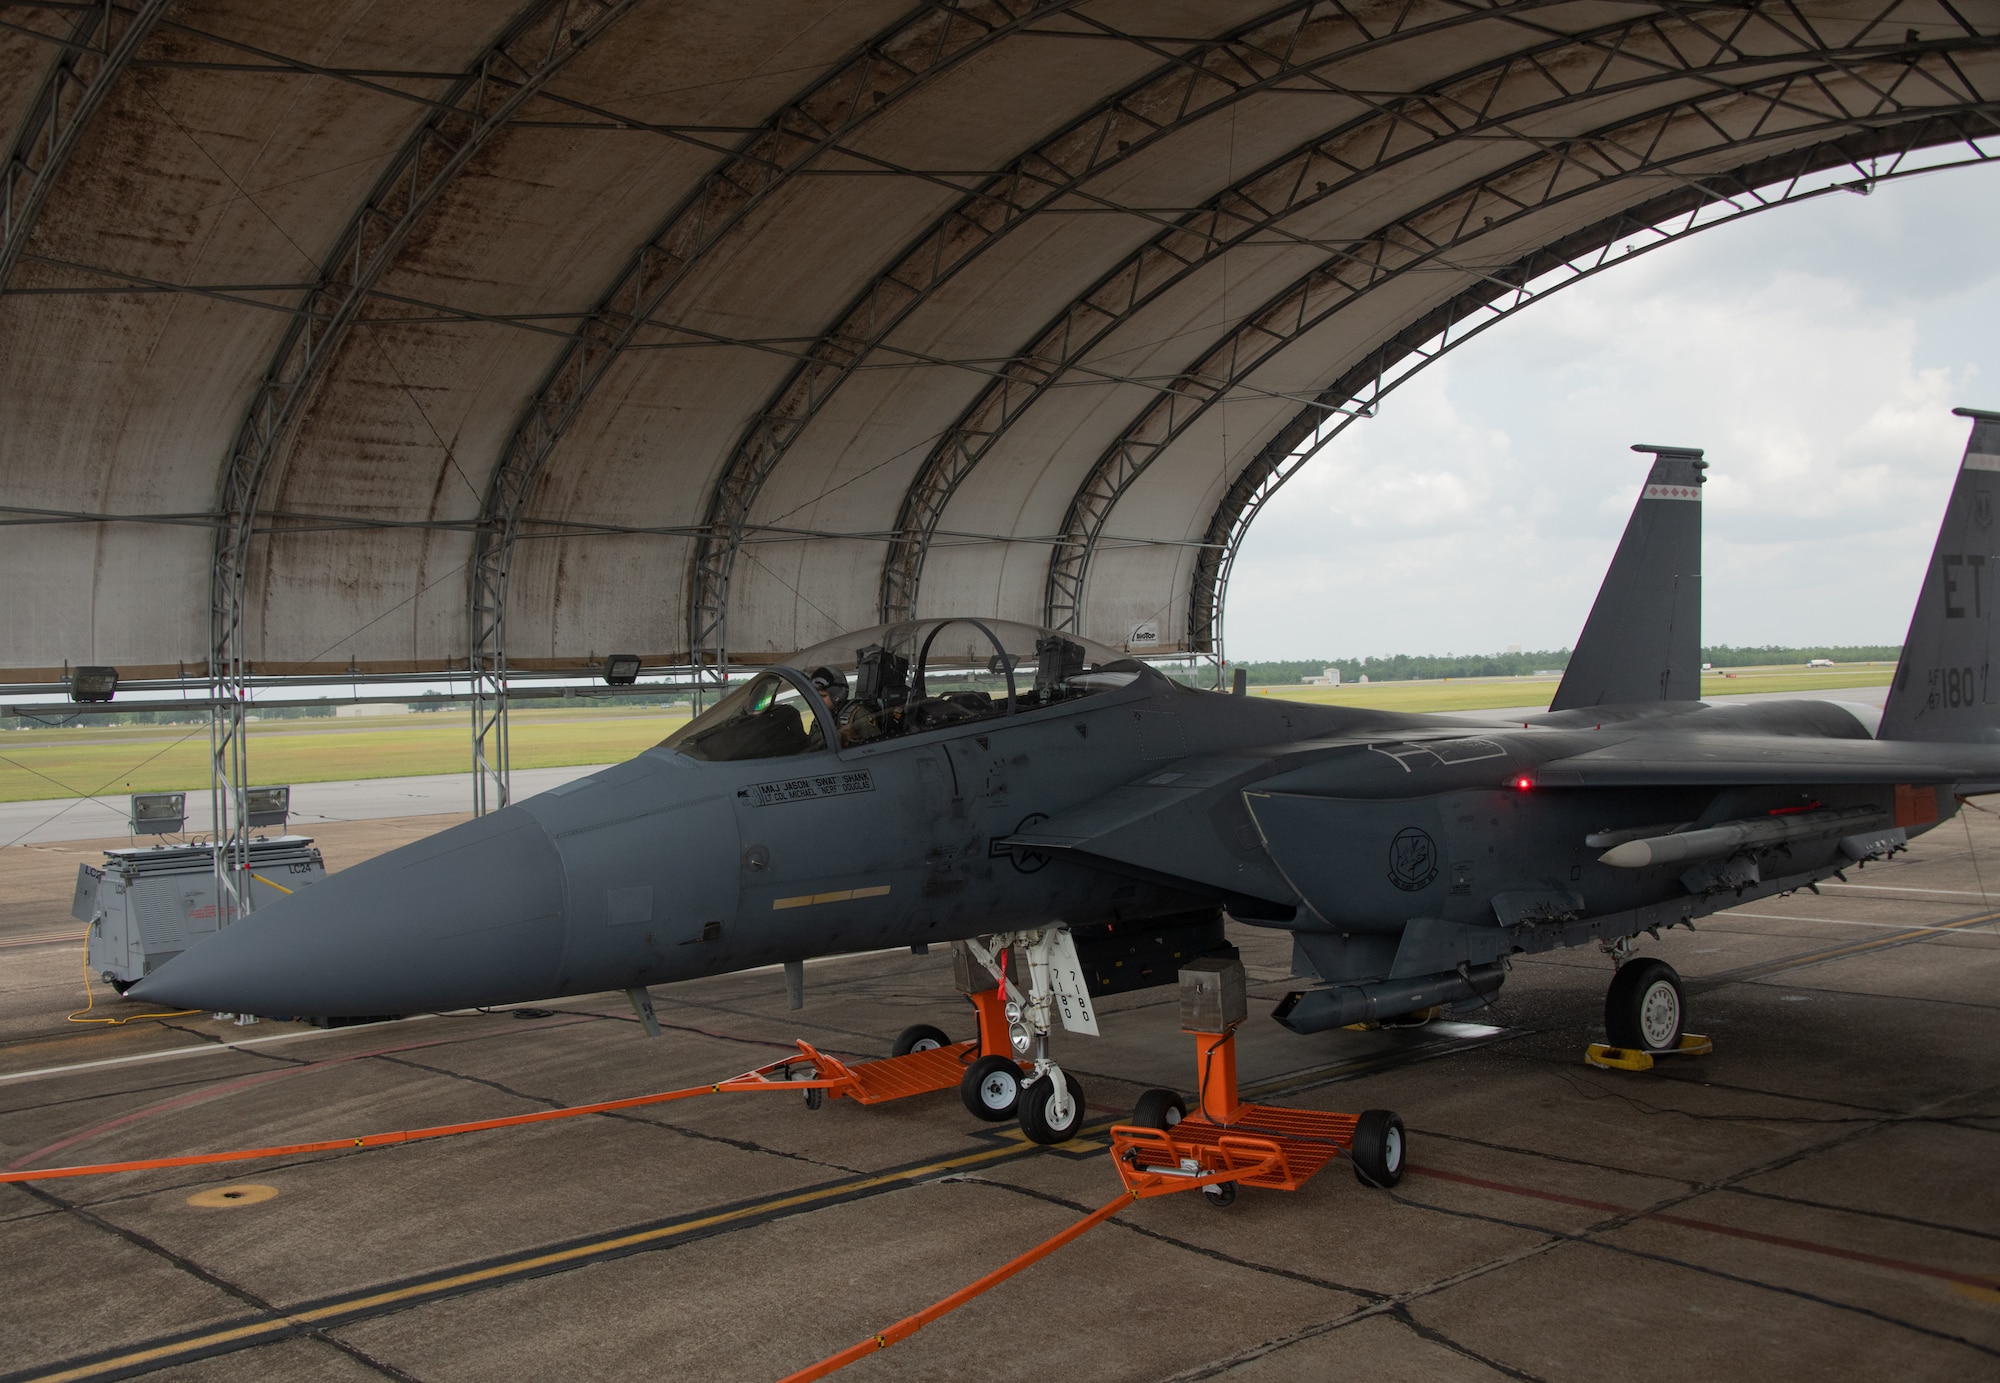 Analysts from the Air Force Research Laboratory's 711th Human Performance Wing use the orange spray carts displayed to insert oil of wintergreen into the idling F-15E Strike Eagle prior to taxi at Eglin Air Force Base, Fla., Aug. 16, 2022. This test is part of a larger Department of Defense effort to evaluate cockpit environmental conditions after a chemical weapon attack (U.S. Air Force photo by Ilka Cole)